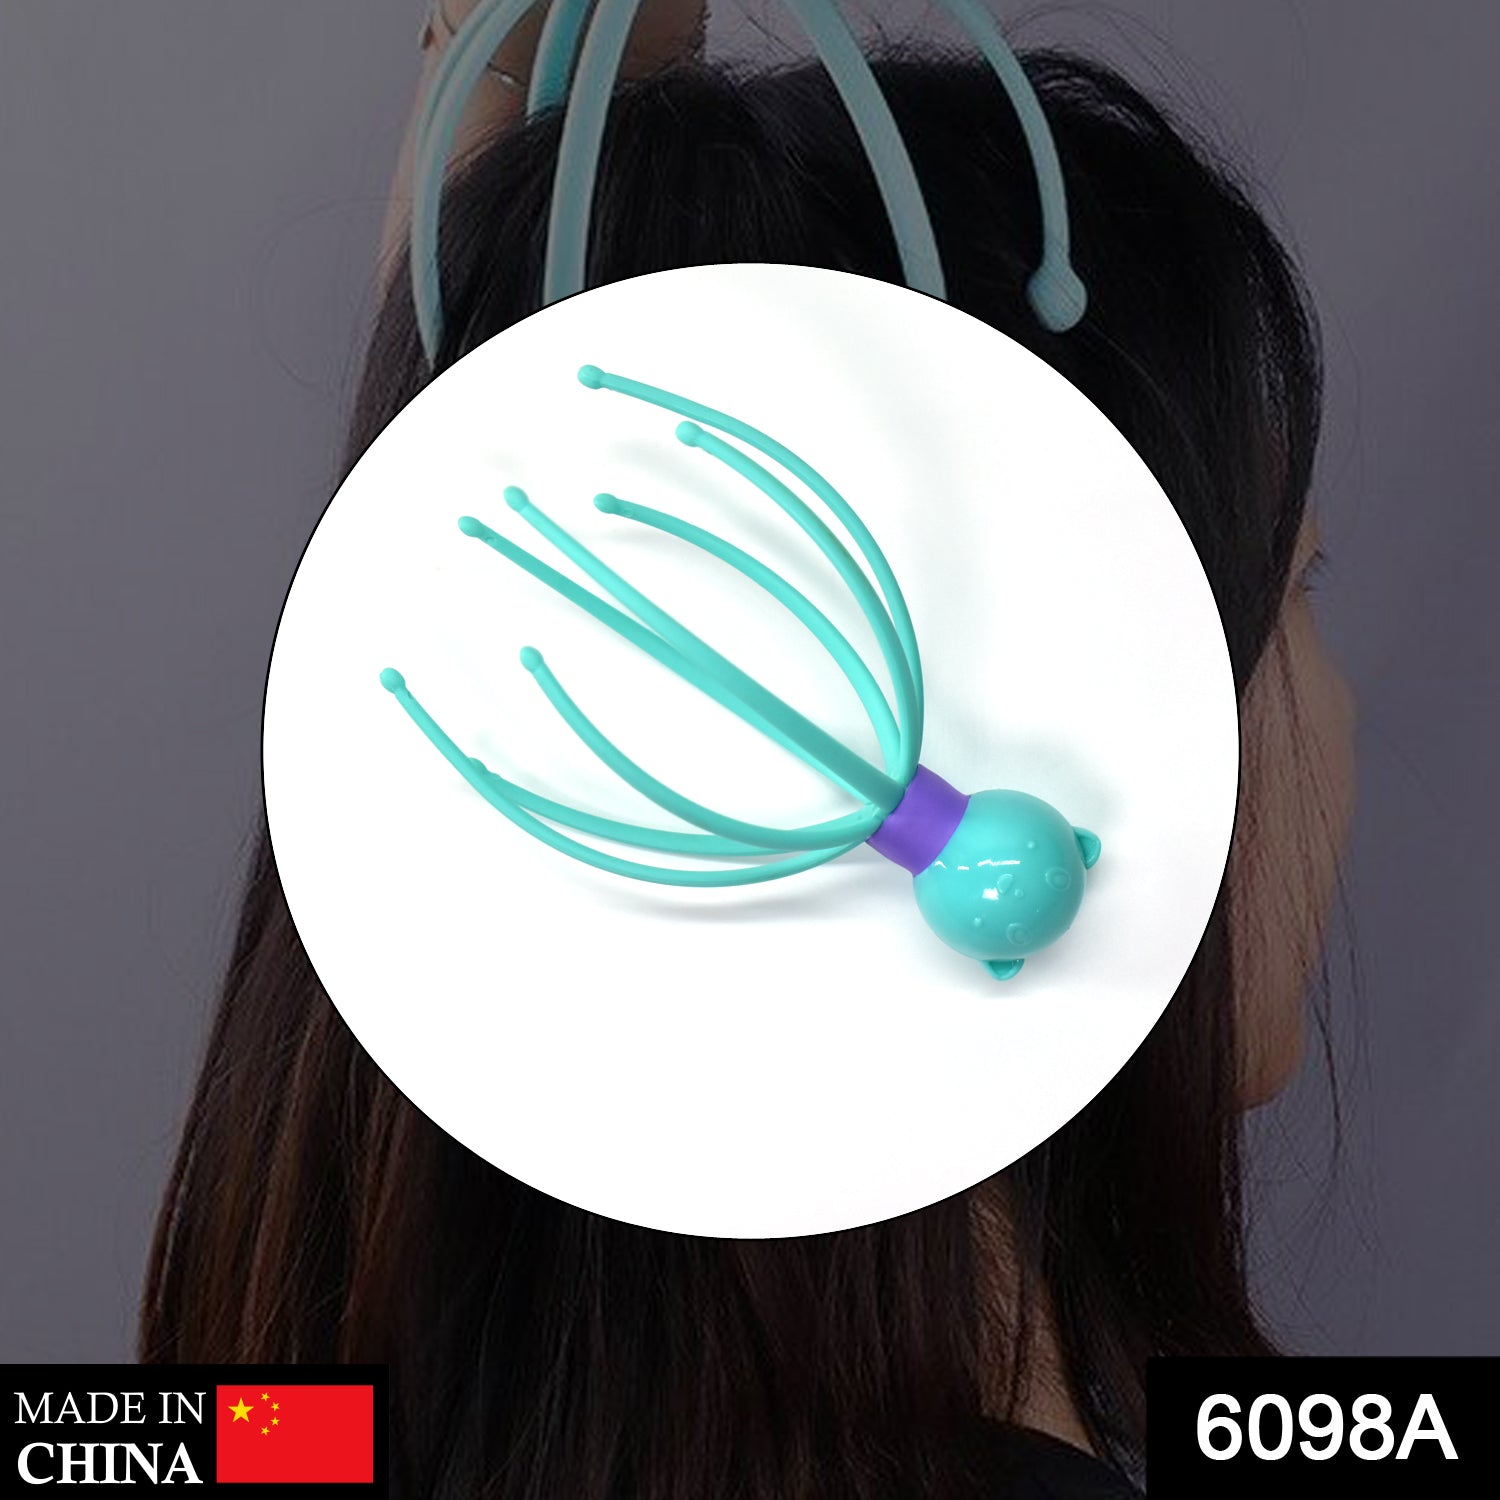 6098 A Octopus Head Massager Used While Massaging Hair Scalps And Head.